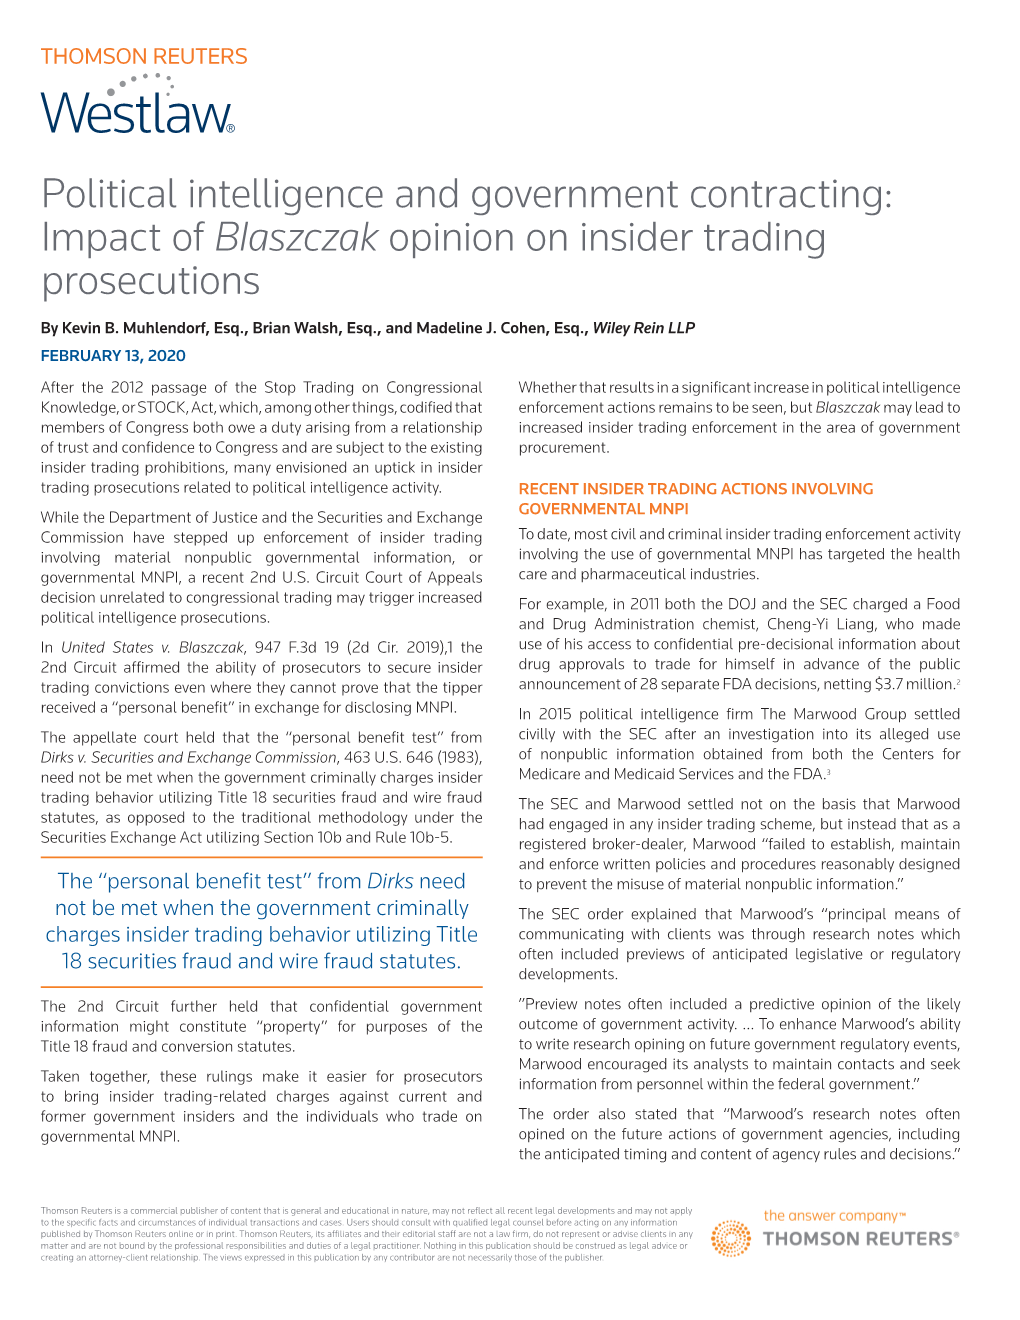 Political Intelligence and Government Contracting: Impact of Blaszczak Opinion on Insider Trading Prosecutions by Kevin B